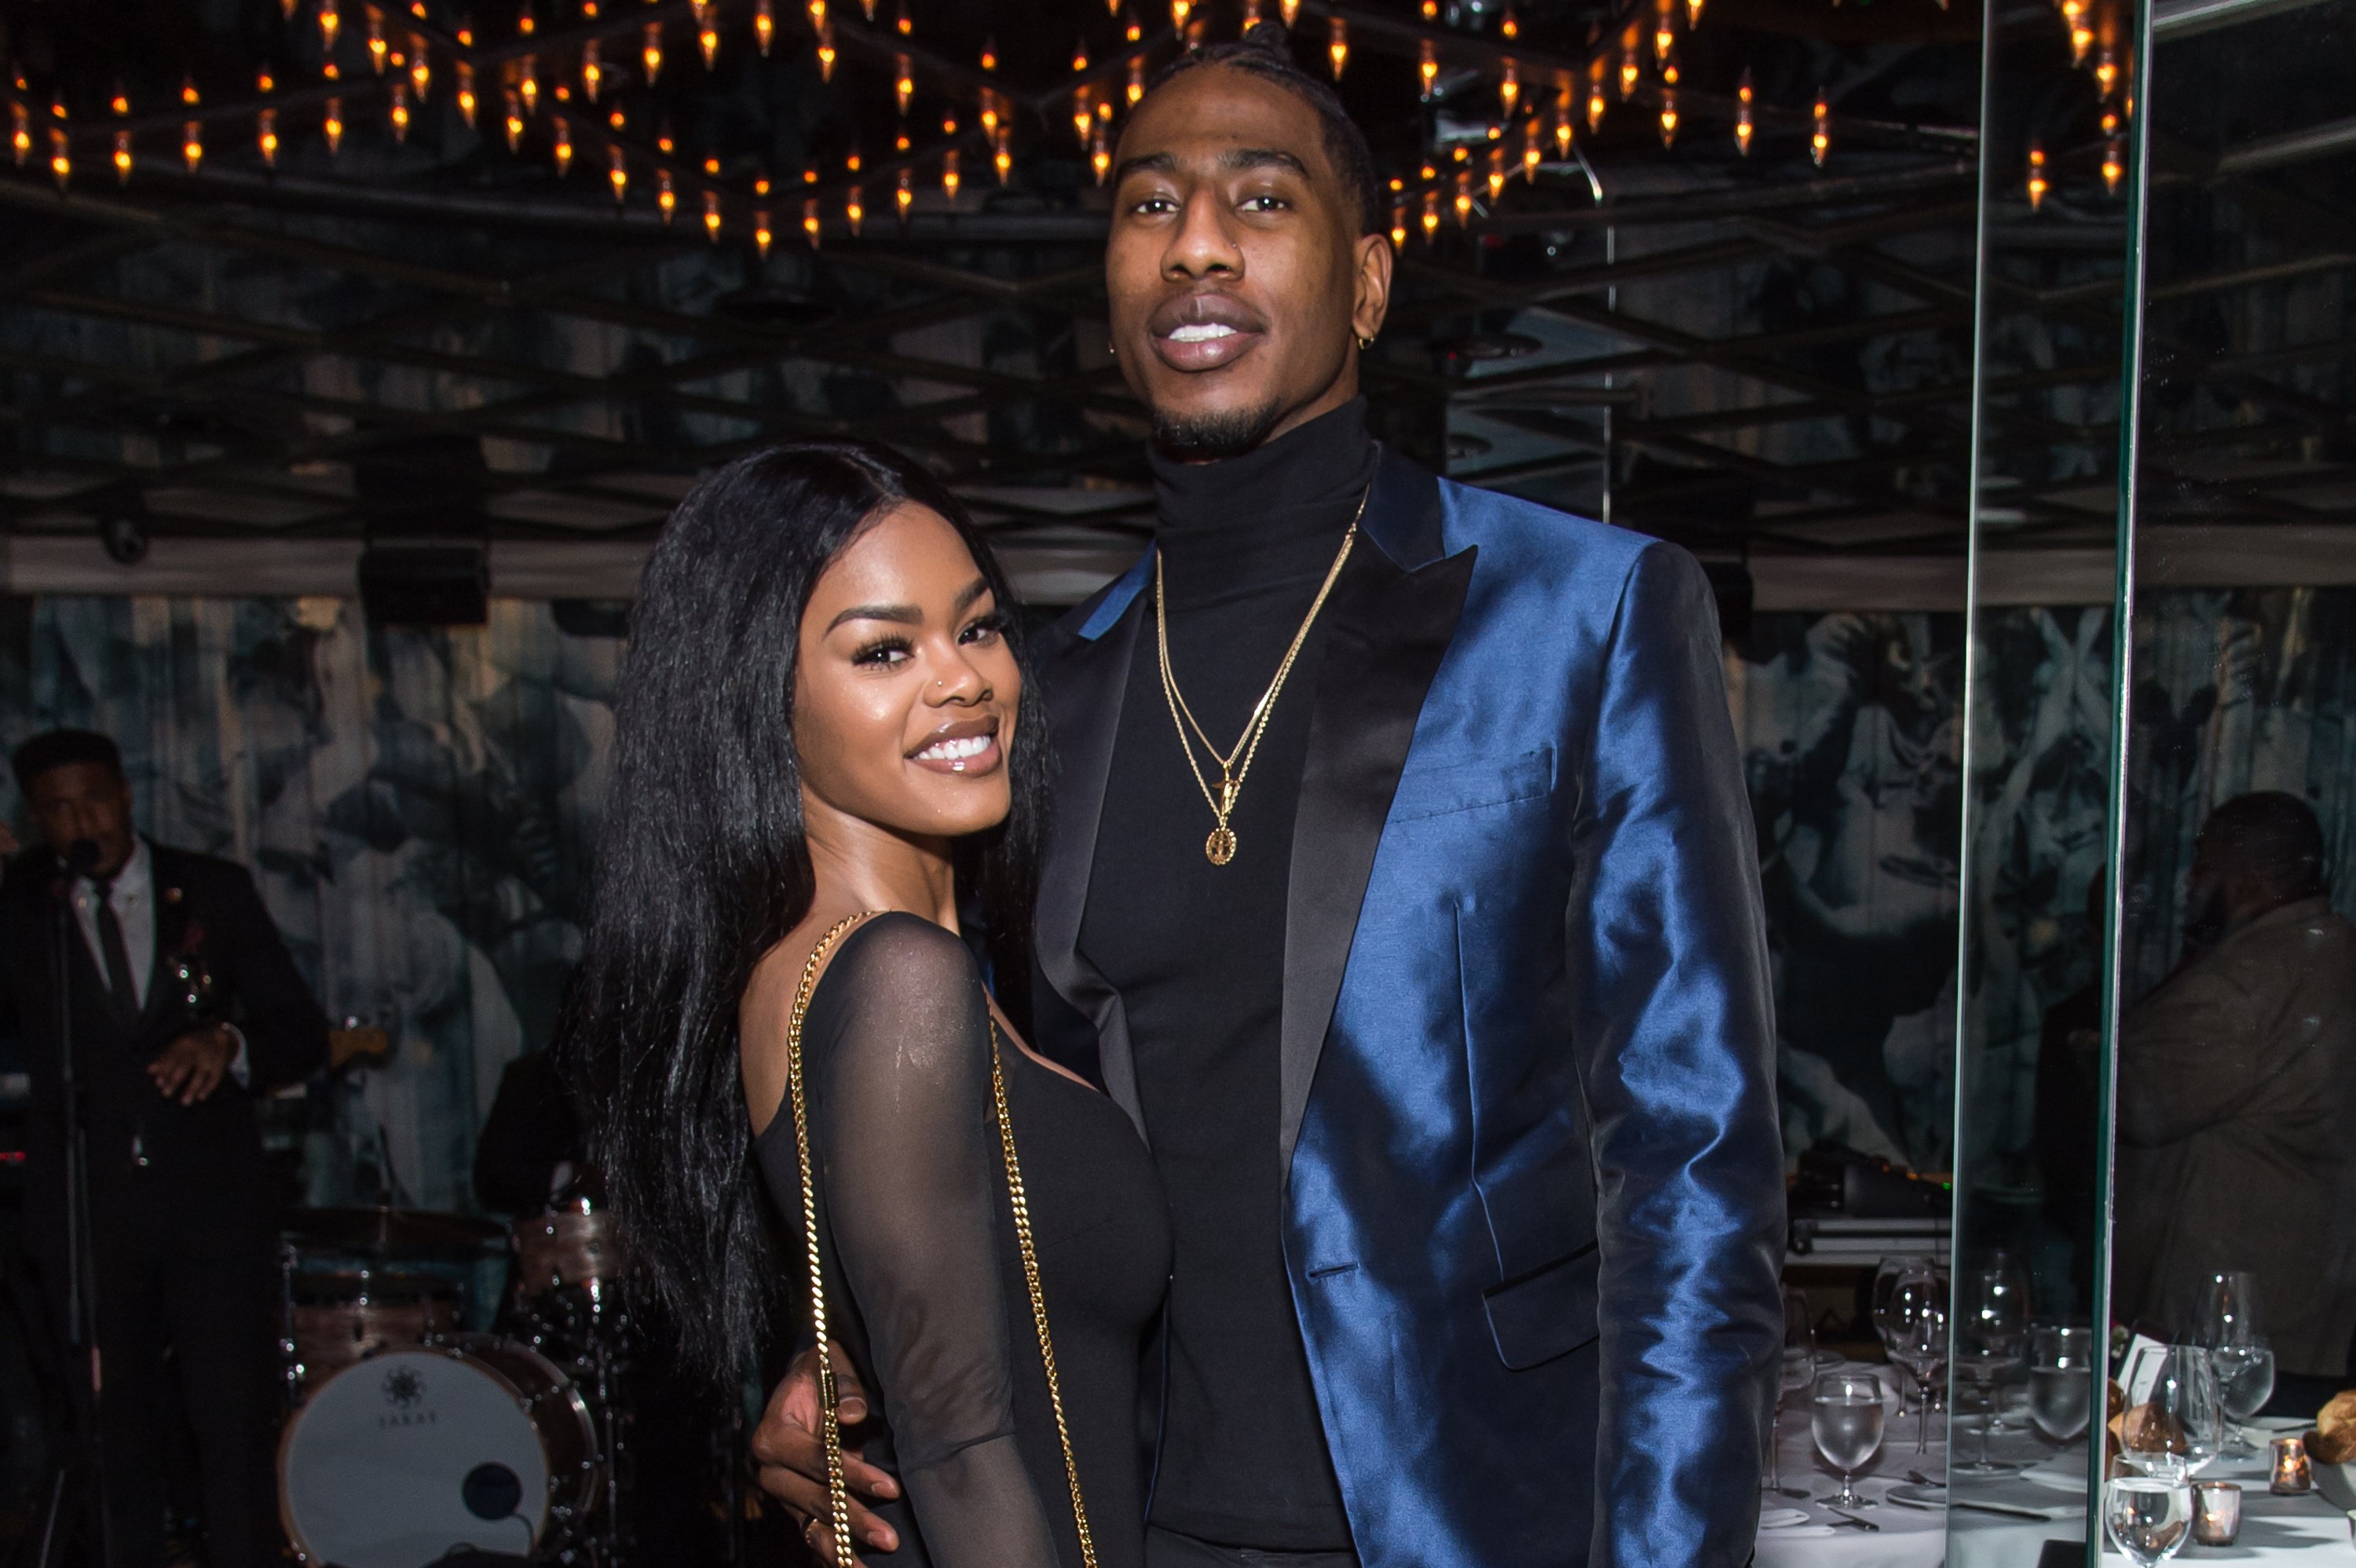 Teyana Taylor and Iman Shumpert pose for photo together at a Forbes dinner party